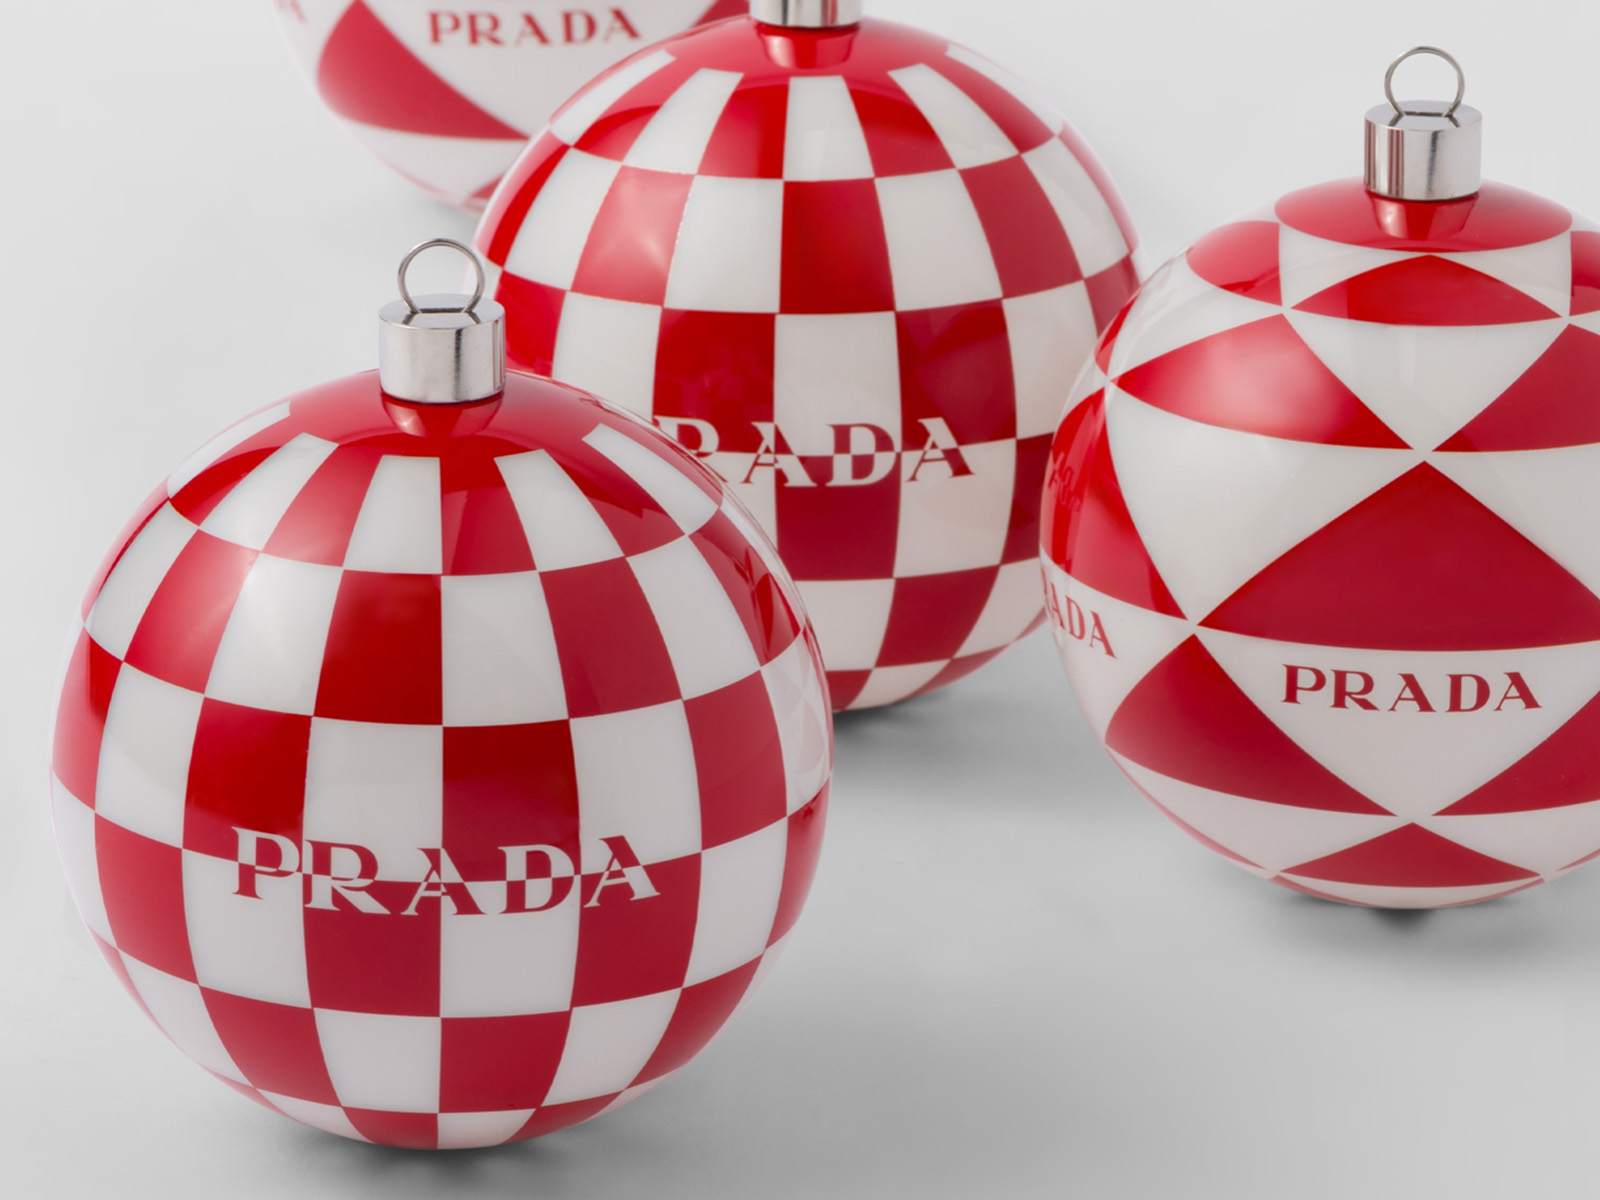 Endearing Prominent Red and White Christmas Ornament | OrnamentallyYou